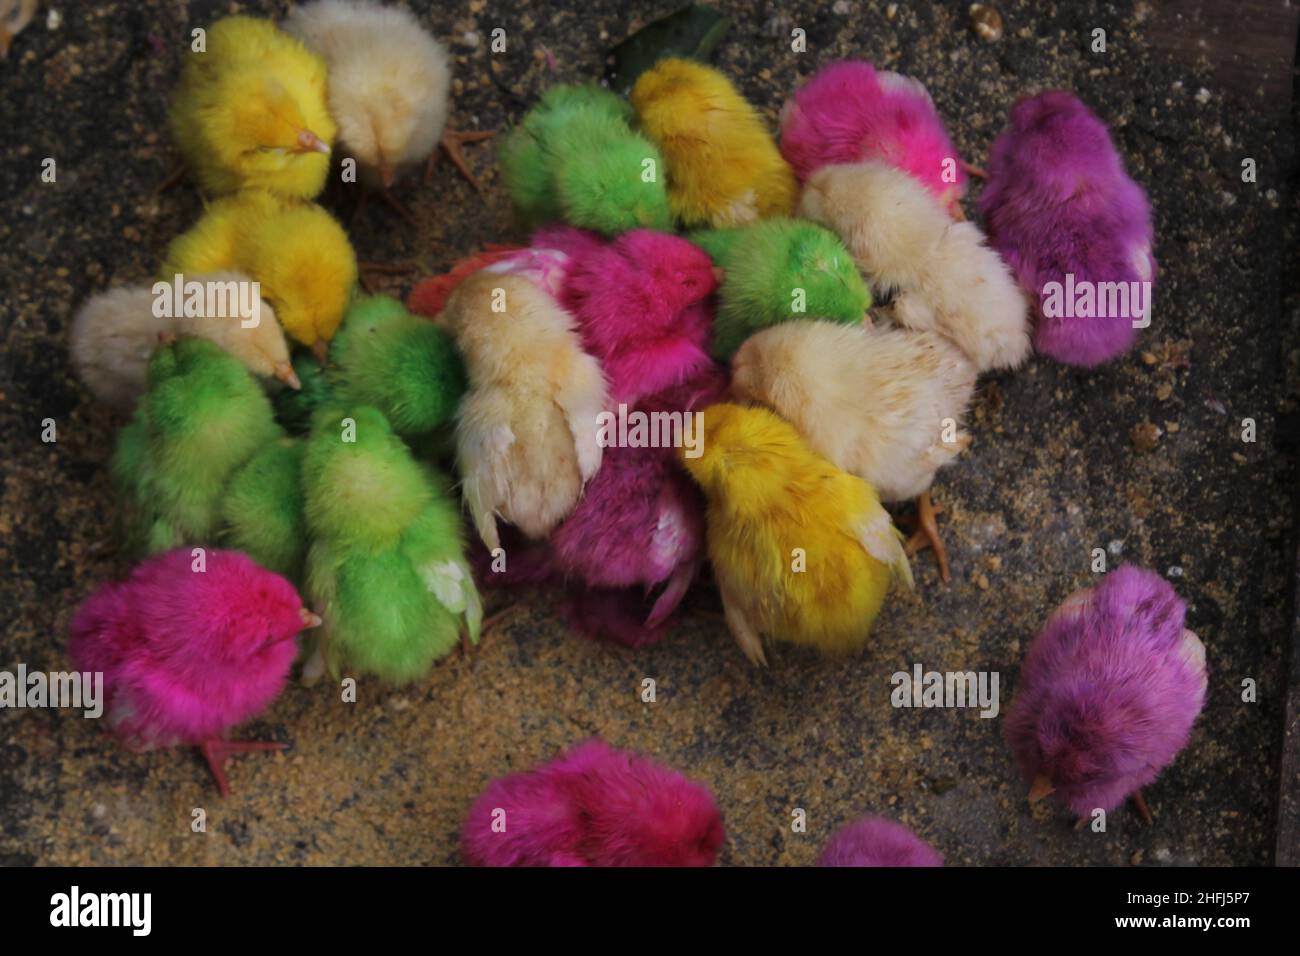 colorful birds for pets at the animal market. Stock Photo